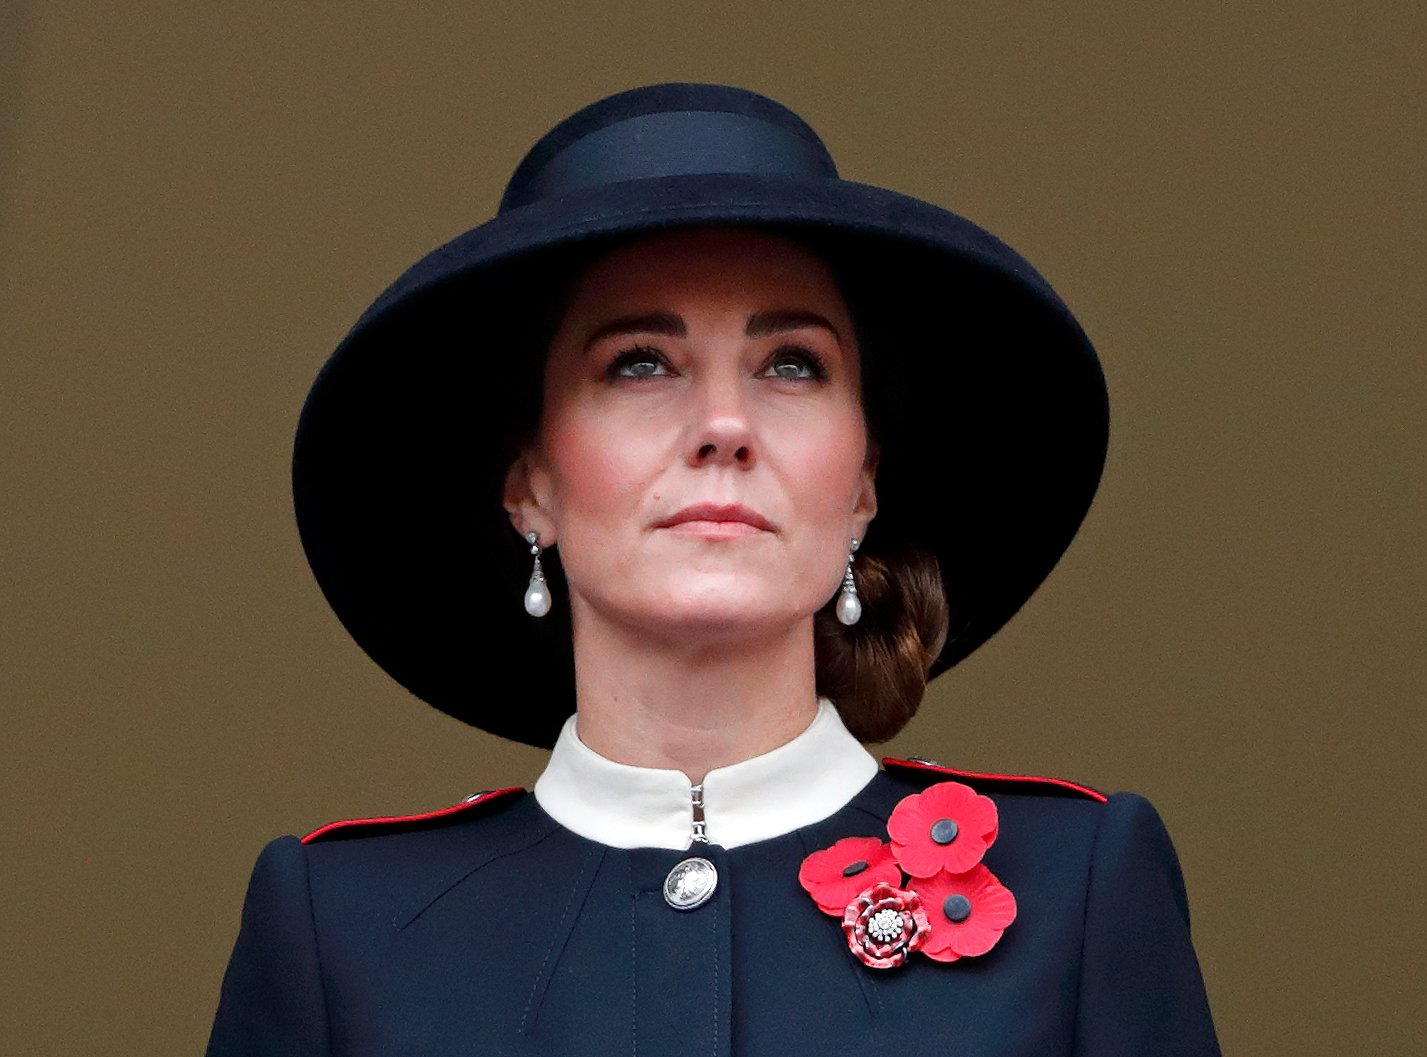 Kate Middleton attends the annual Remembrance Sunday service at The Cenotaph